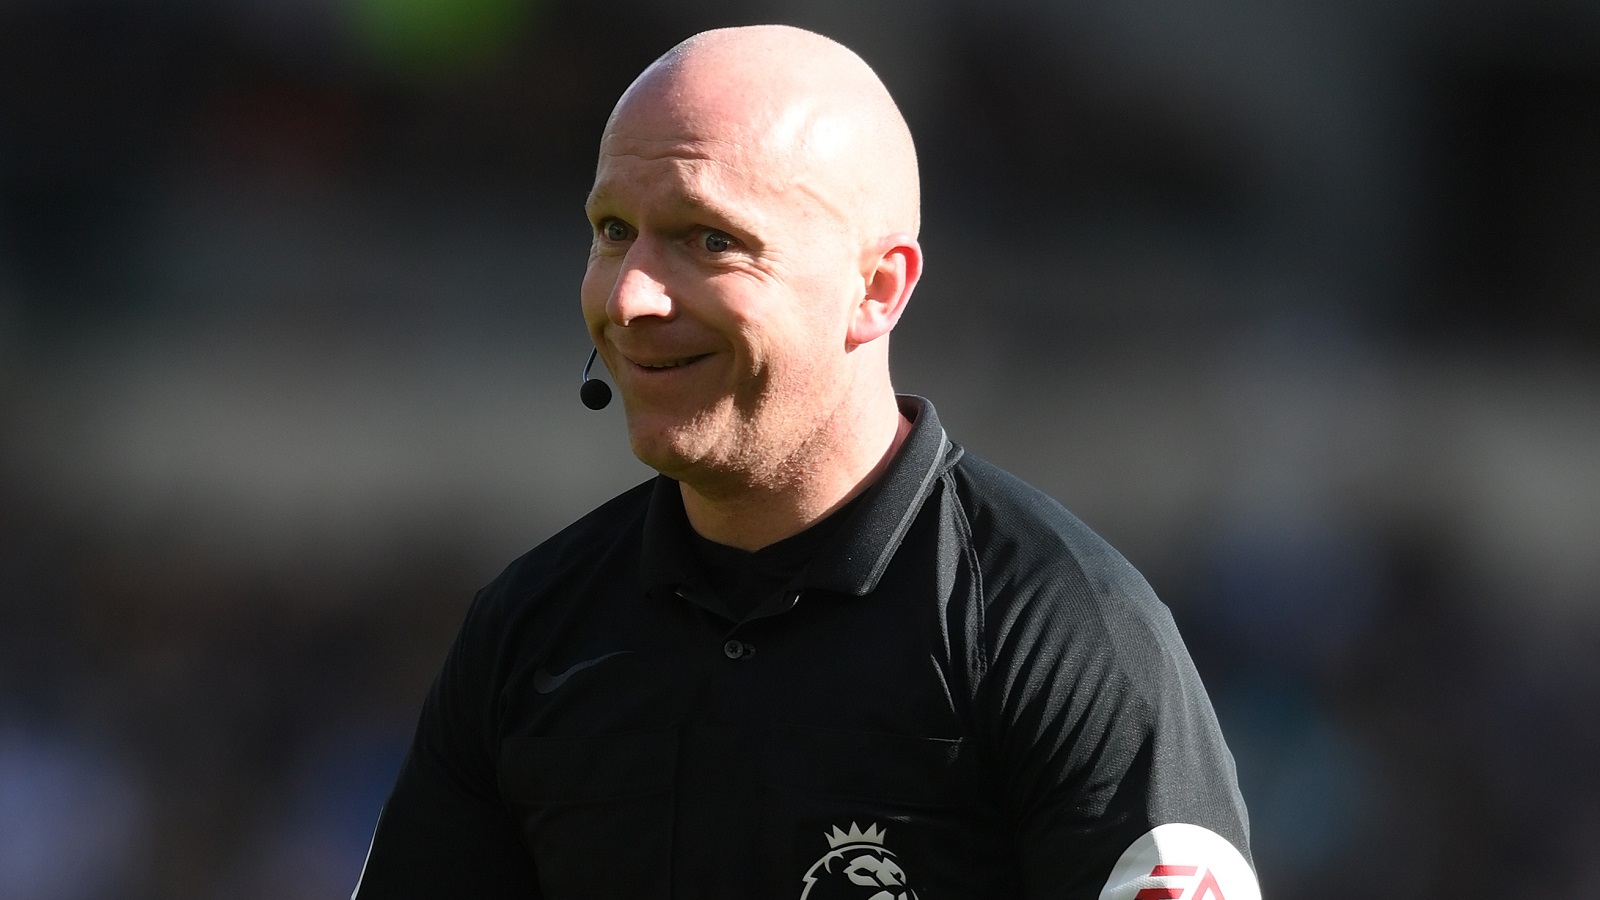 Match officials for Magpies' season opener revealed